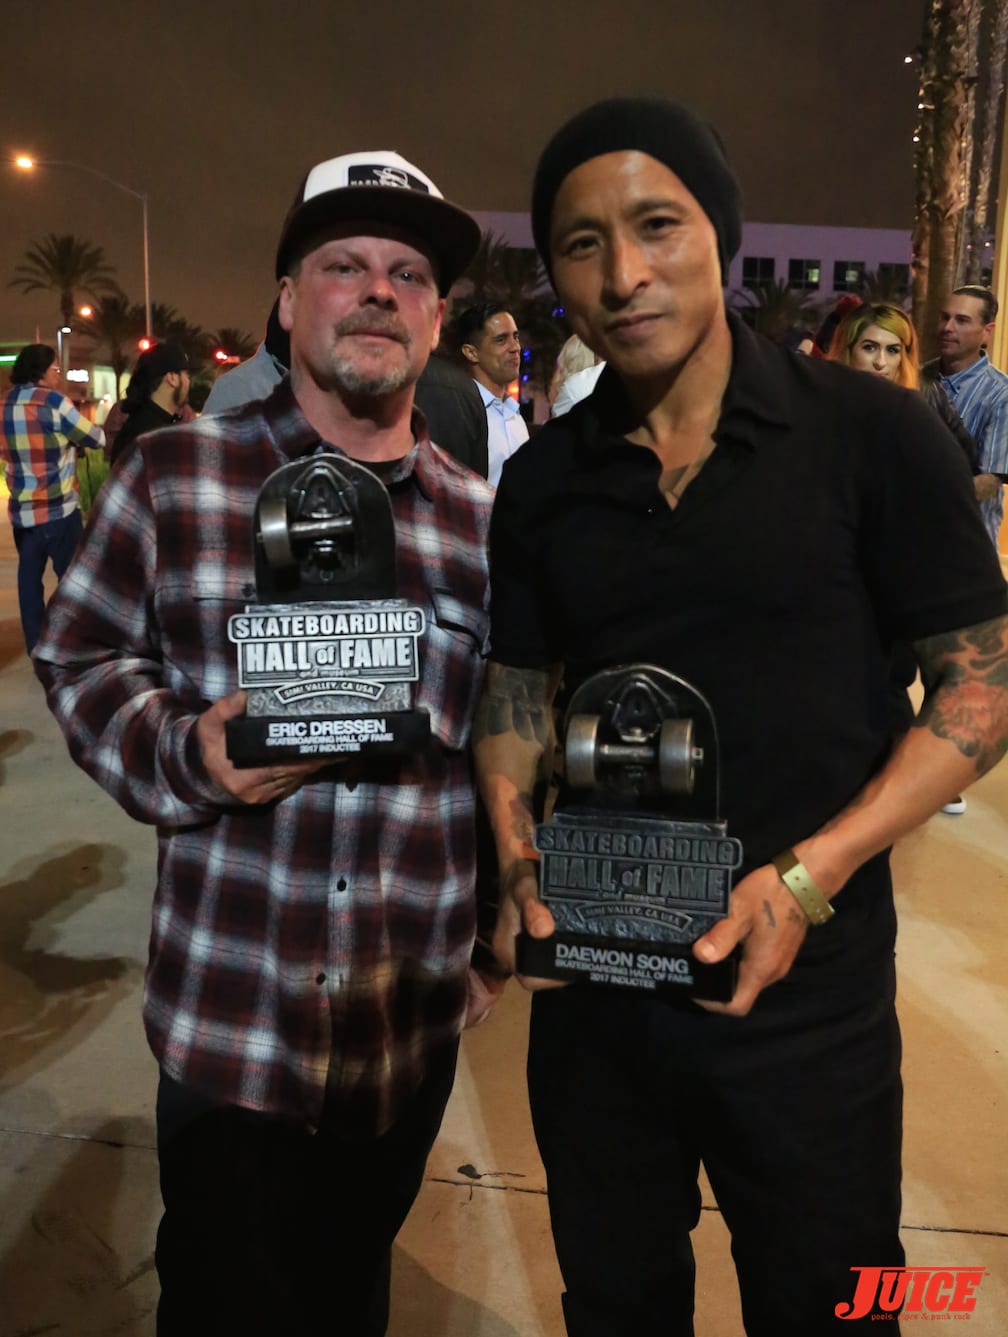 Eric Dressen and Daewon Song. Photo by Dan Levy © Juice Magazine